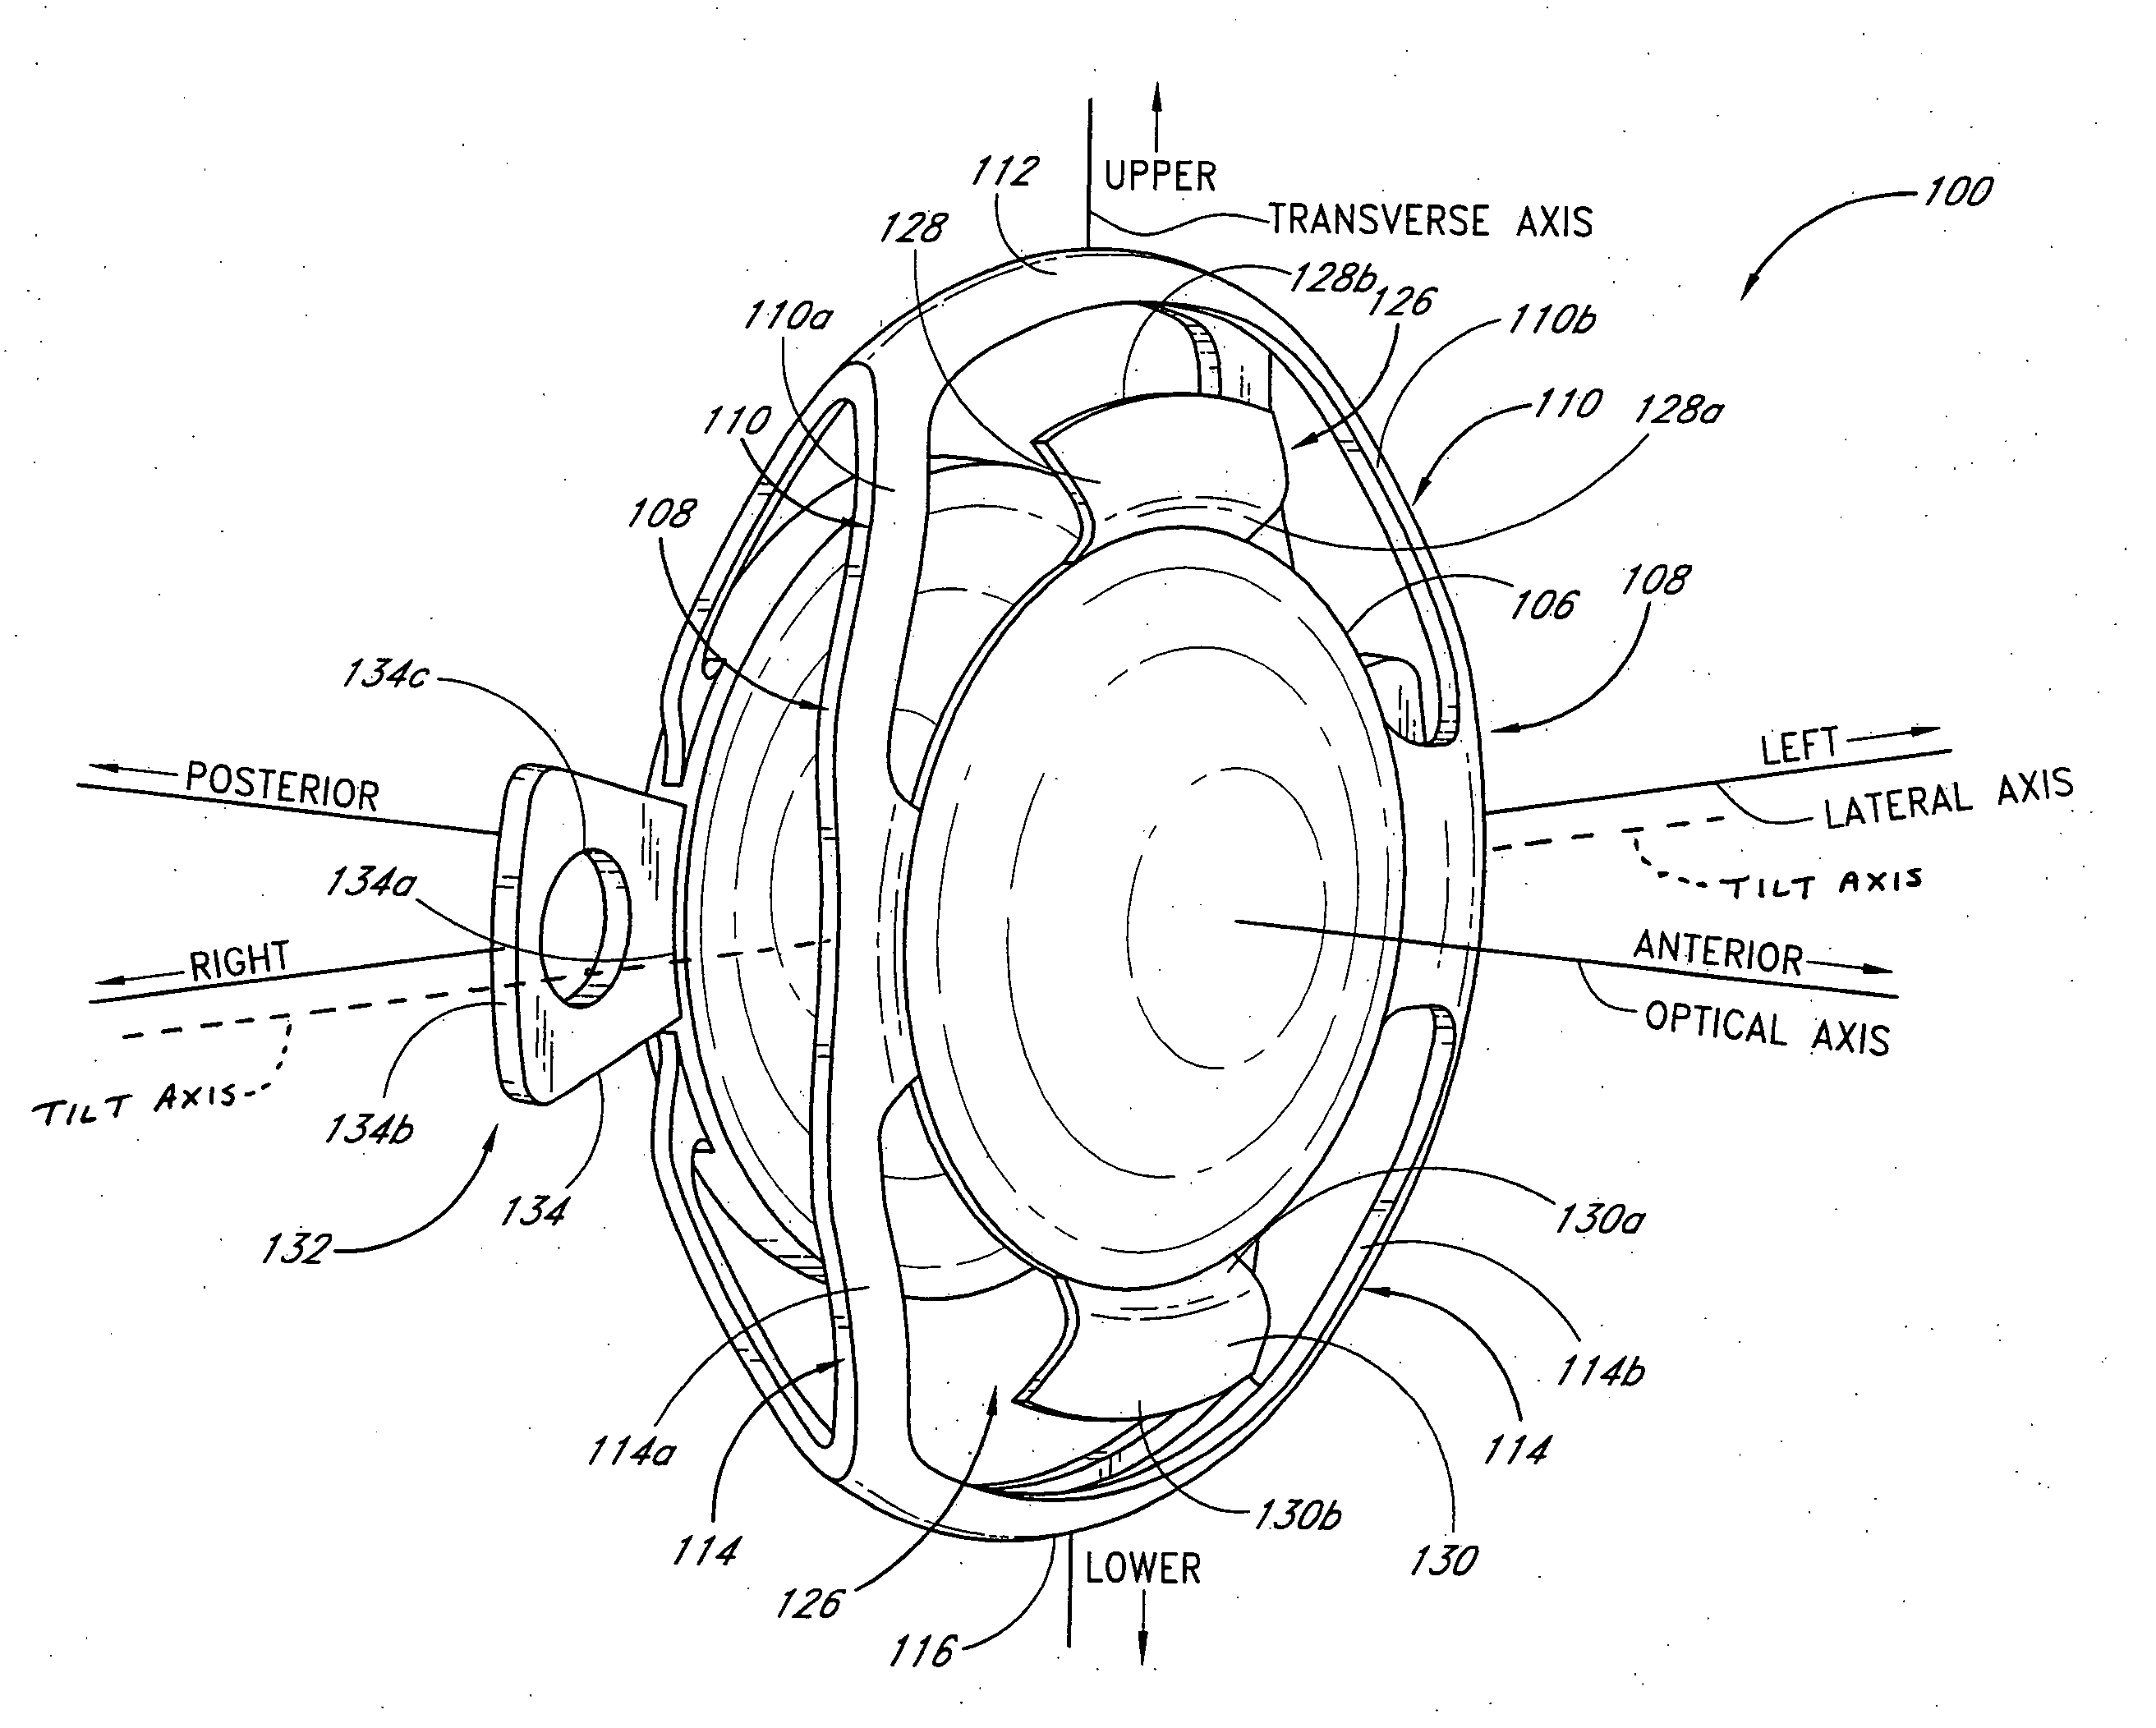 Accommodating intraocular lens system with aberration-enhanced performance